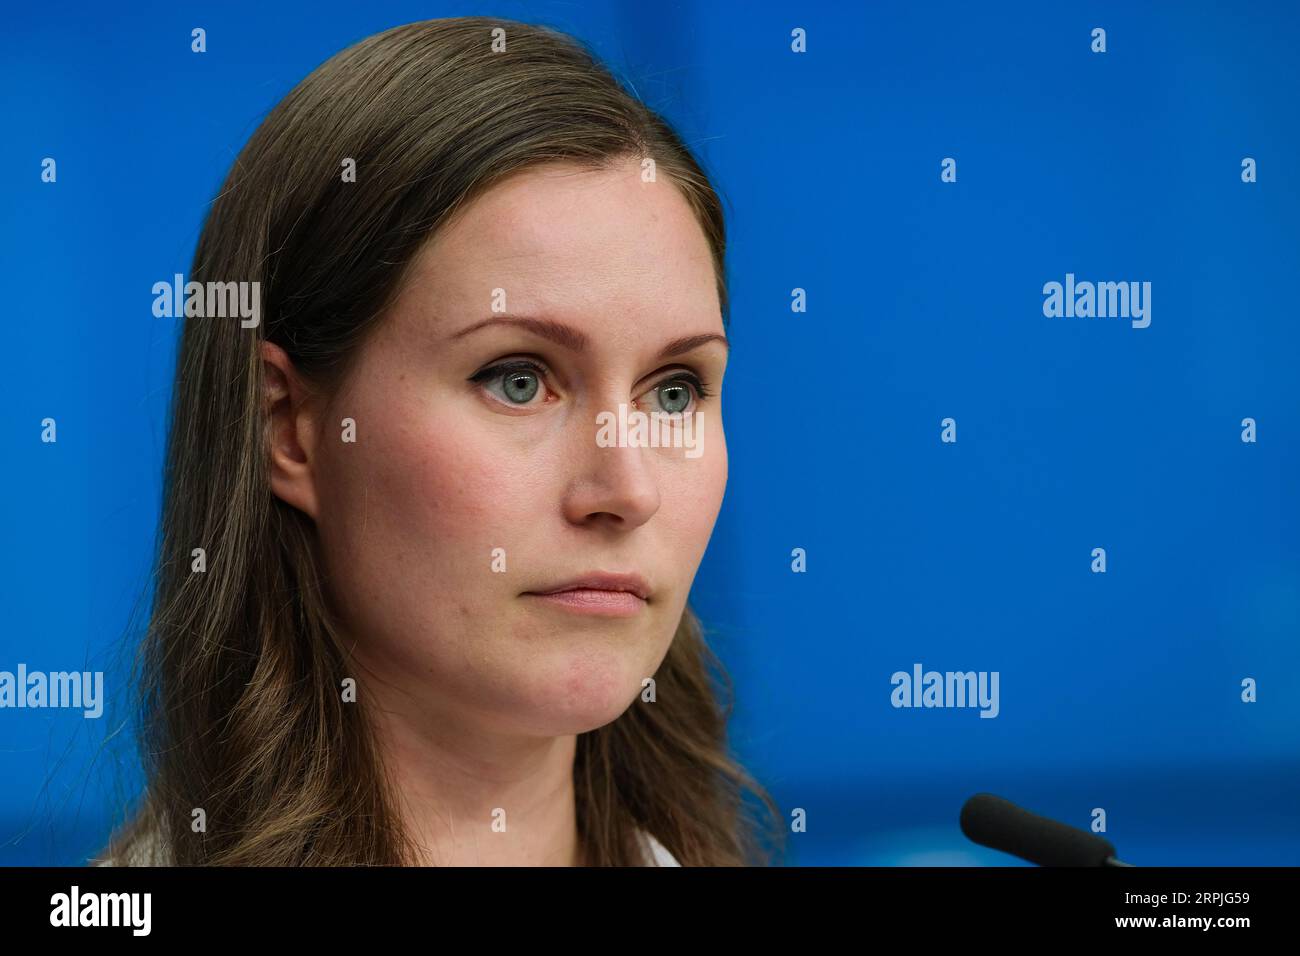 191209 -- BRUSSEL, Dec. 9, 2019 -- File photo taken on Sept. 20, 2019 shows Finnish Minister of Transport and Communications Sanna Marin attending a press conference of the EU Transport, Telecommunications and Energy Council in Brussels, Belgium. Finland s Social Democratic Party SDP, one of the five parties that form the coalition government, on Sunday picked 34-year-old Sanna Marin to be the country s youngest prime minister. Marin, who is currently Finnish Minister of Transport and Communications, narrowly won over Antti Lindtman, the 37-year-old chairman of the Social Democratic Parliament Stock Photo